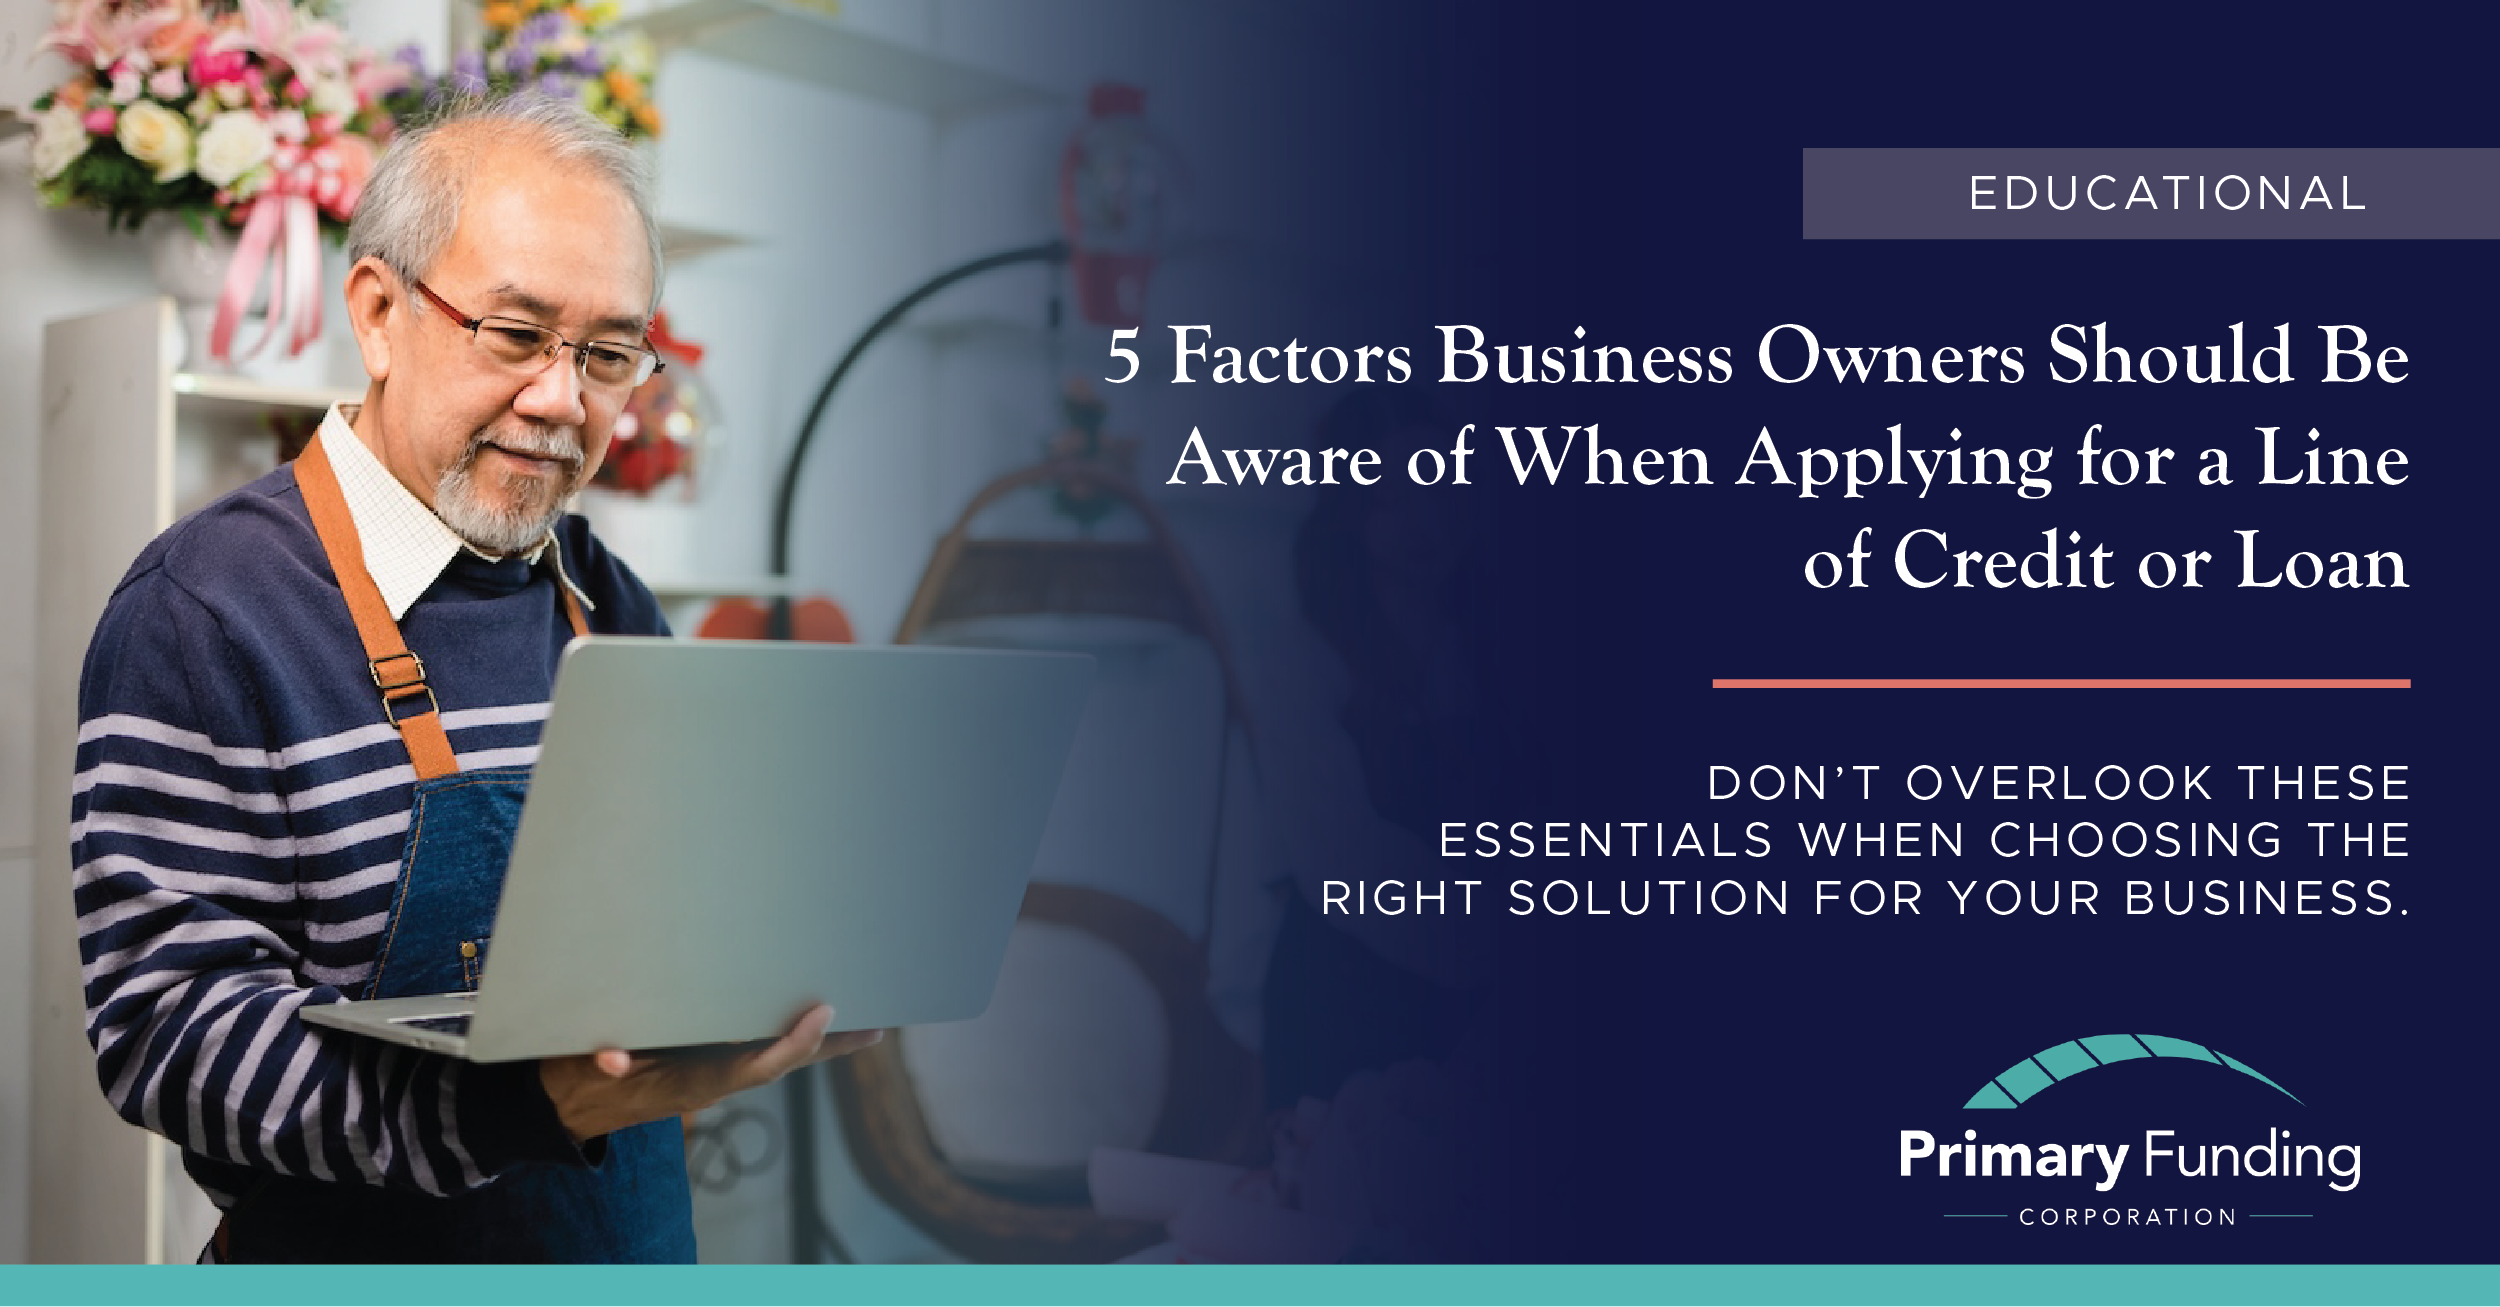 5 Factors Business Owners Should Be Aware of When Applying for a Line of Credit or Loan post image